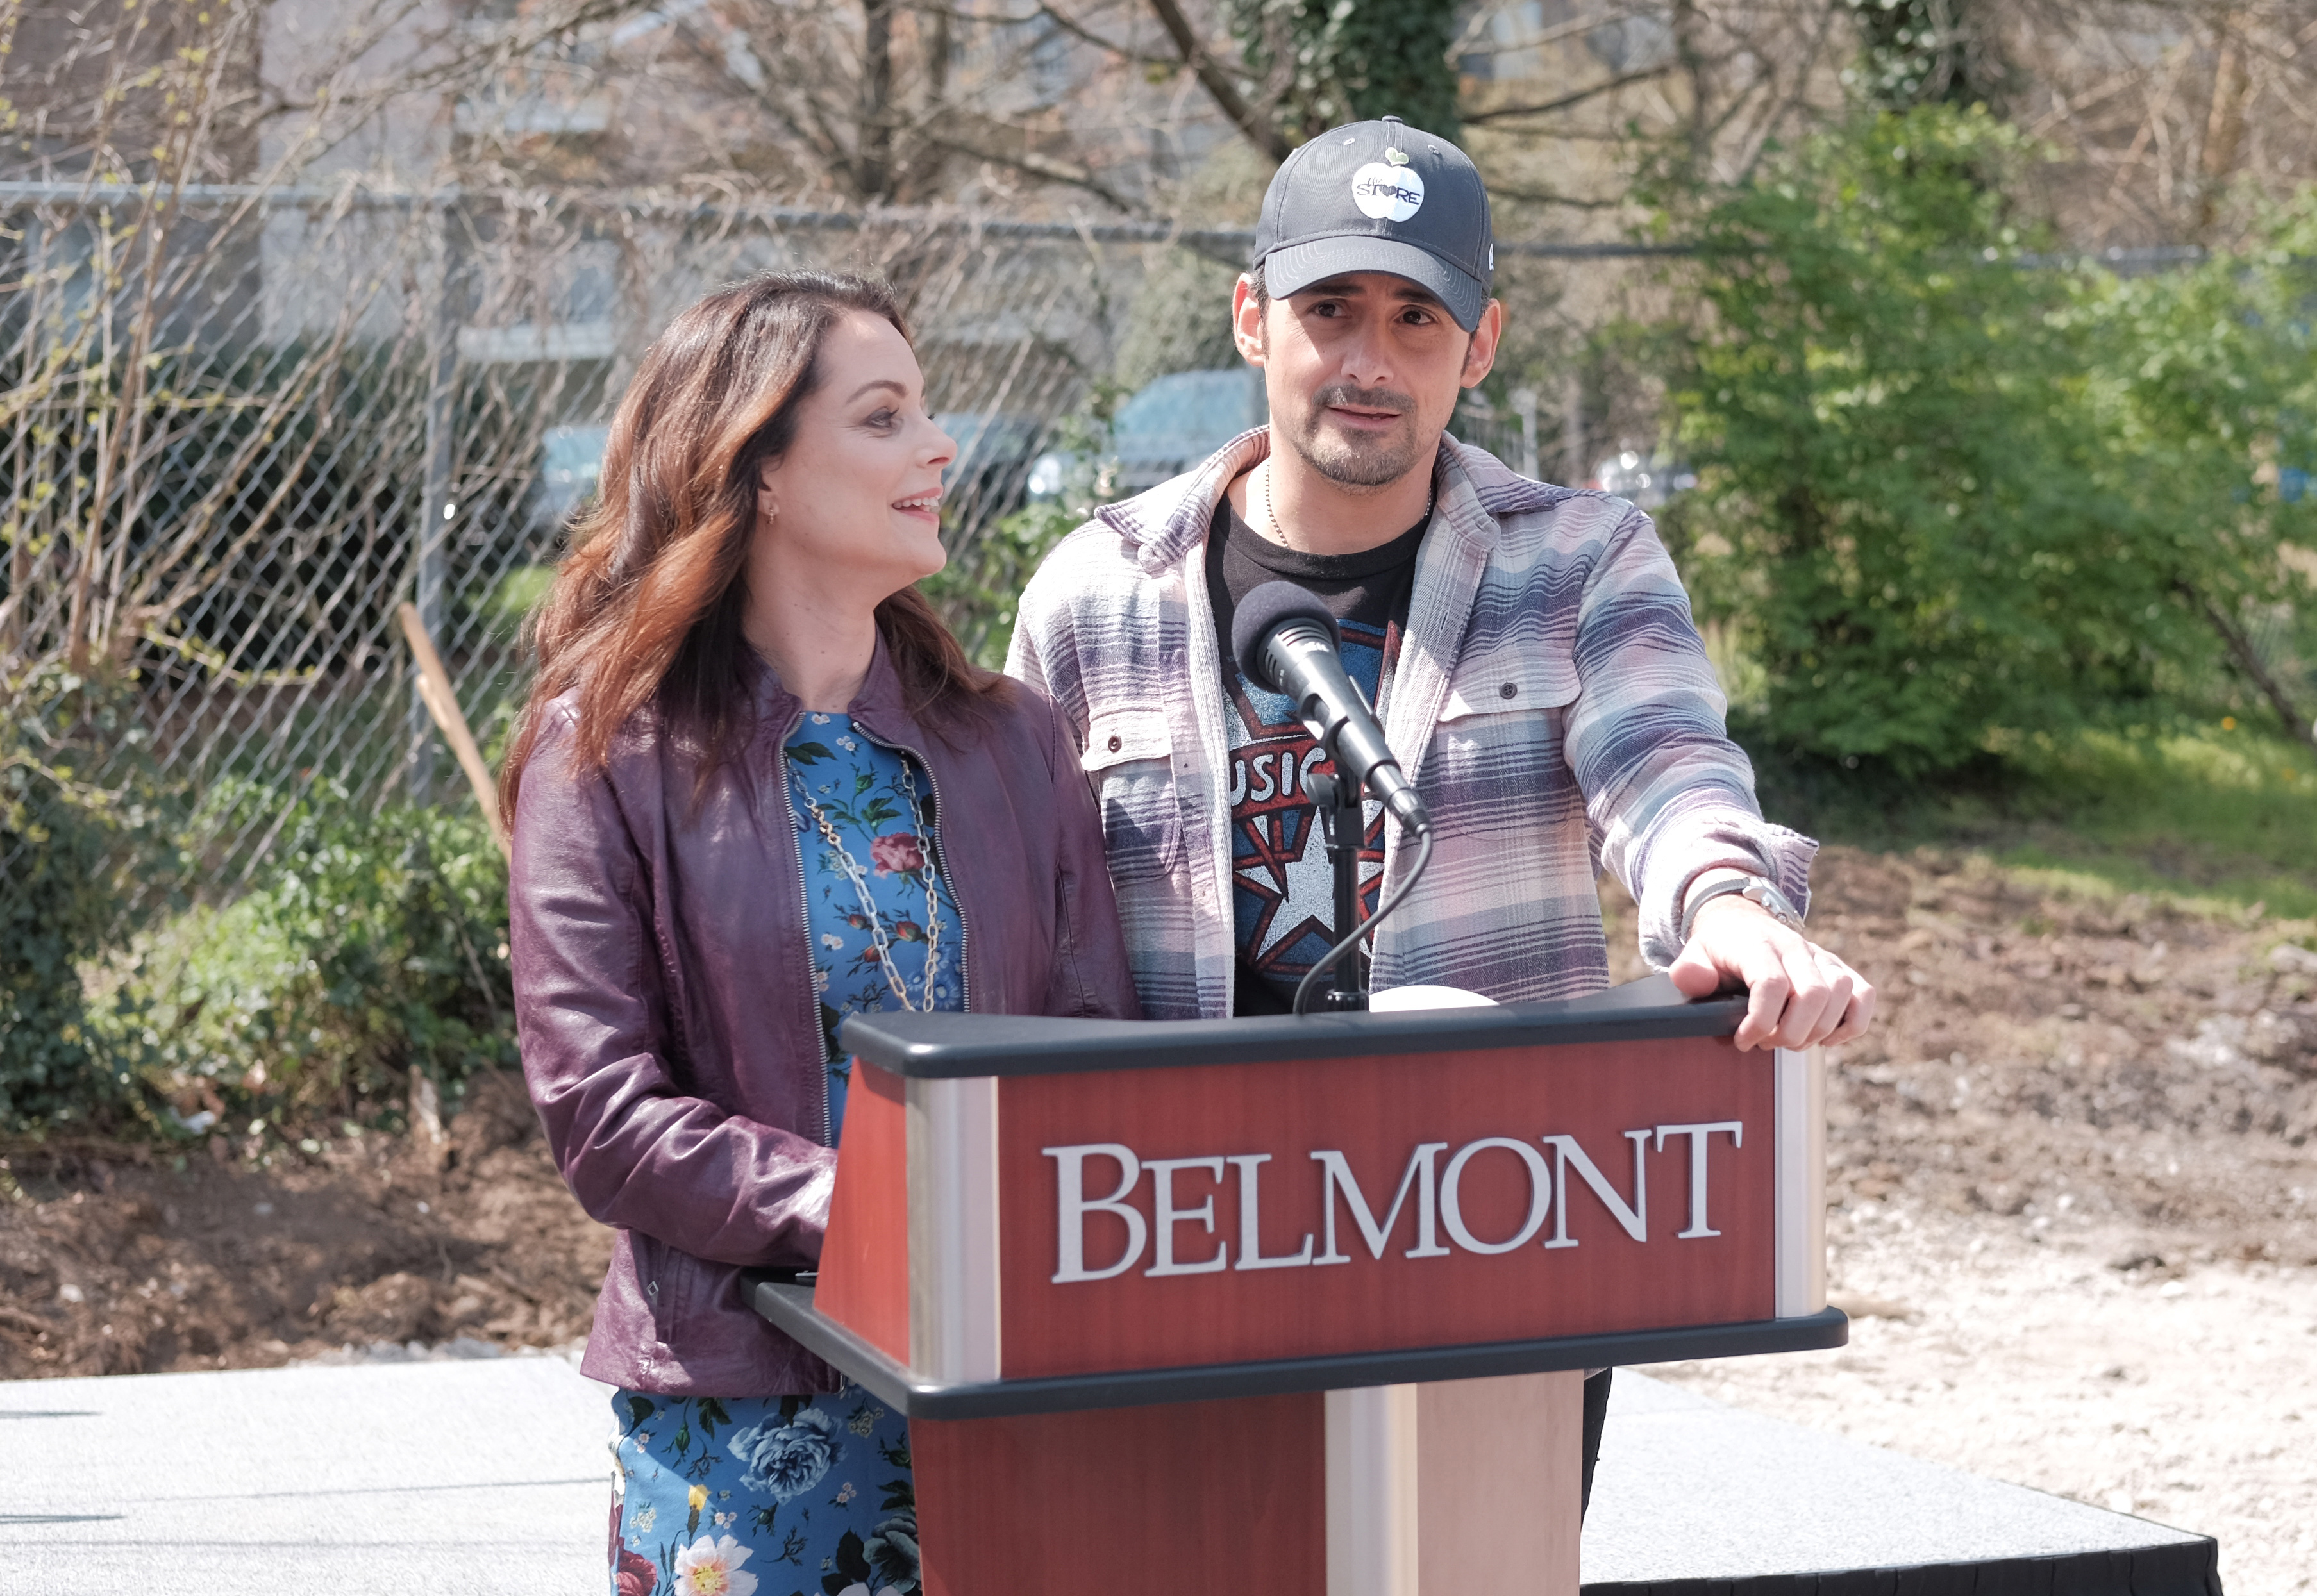 APRIL 03: Kimberly Williams-Paisley and Brad Paisley break ground for grocery site "The Store" on April 03, 2019 in Nashville, Tennessee. | Source: Getty Images